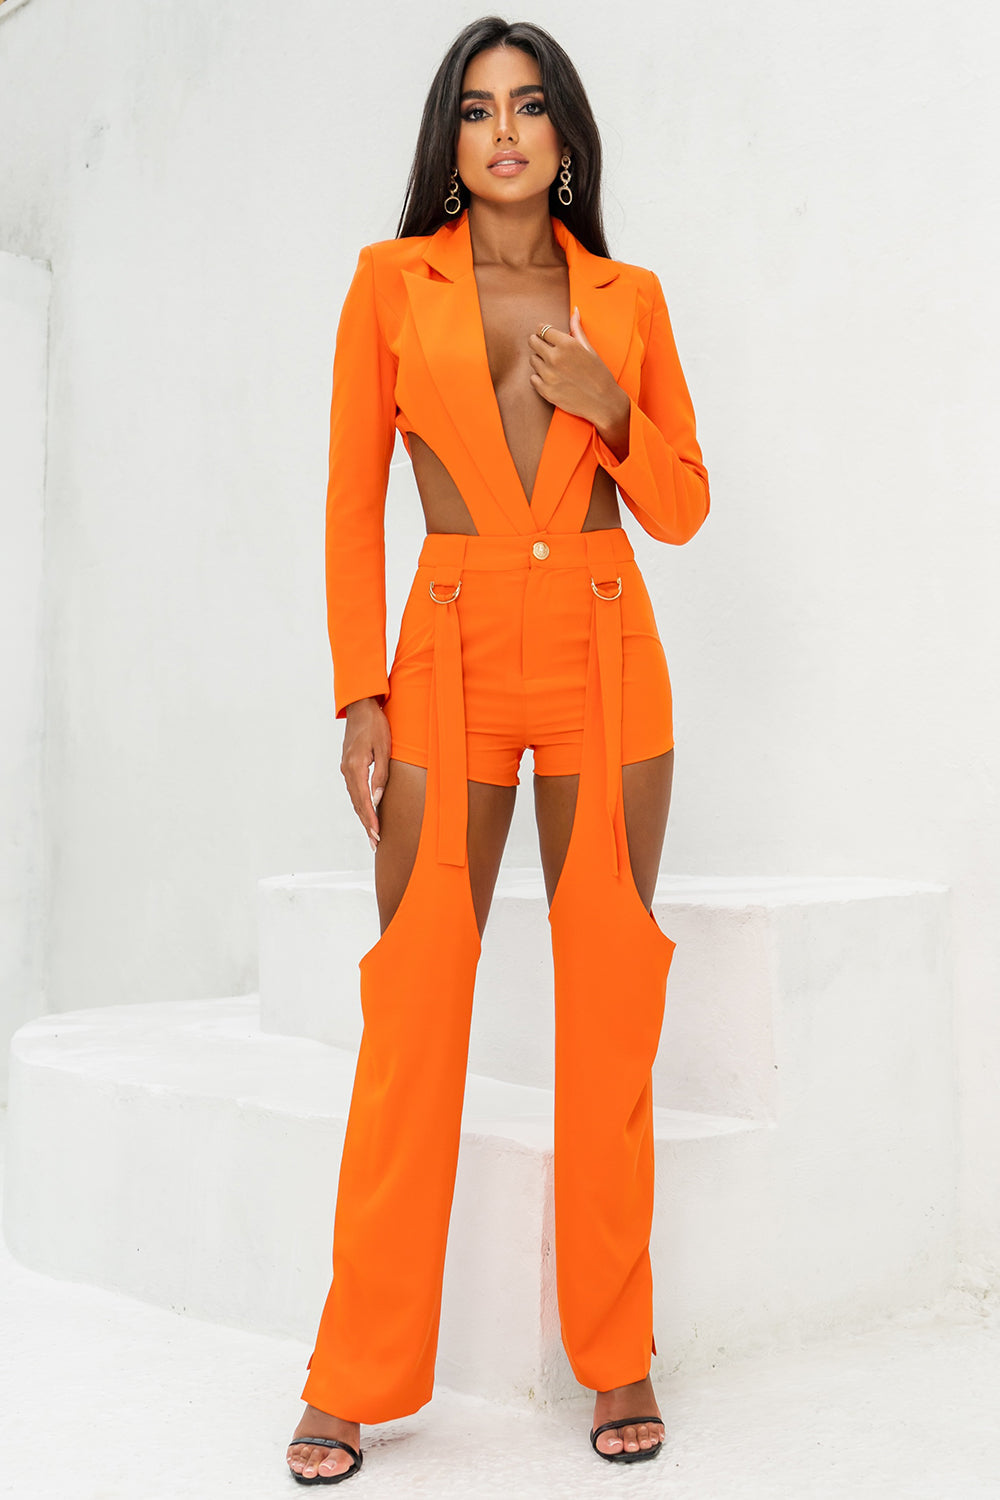 Sesidy Gelsey Collared V-Neck Asymmetric Pantsuits in Orange